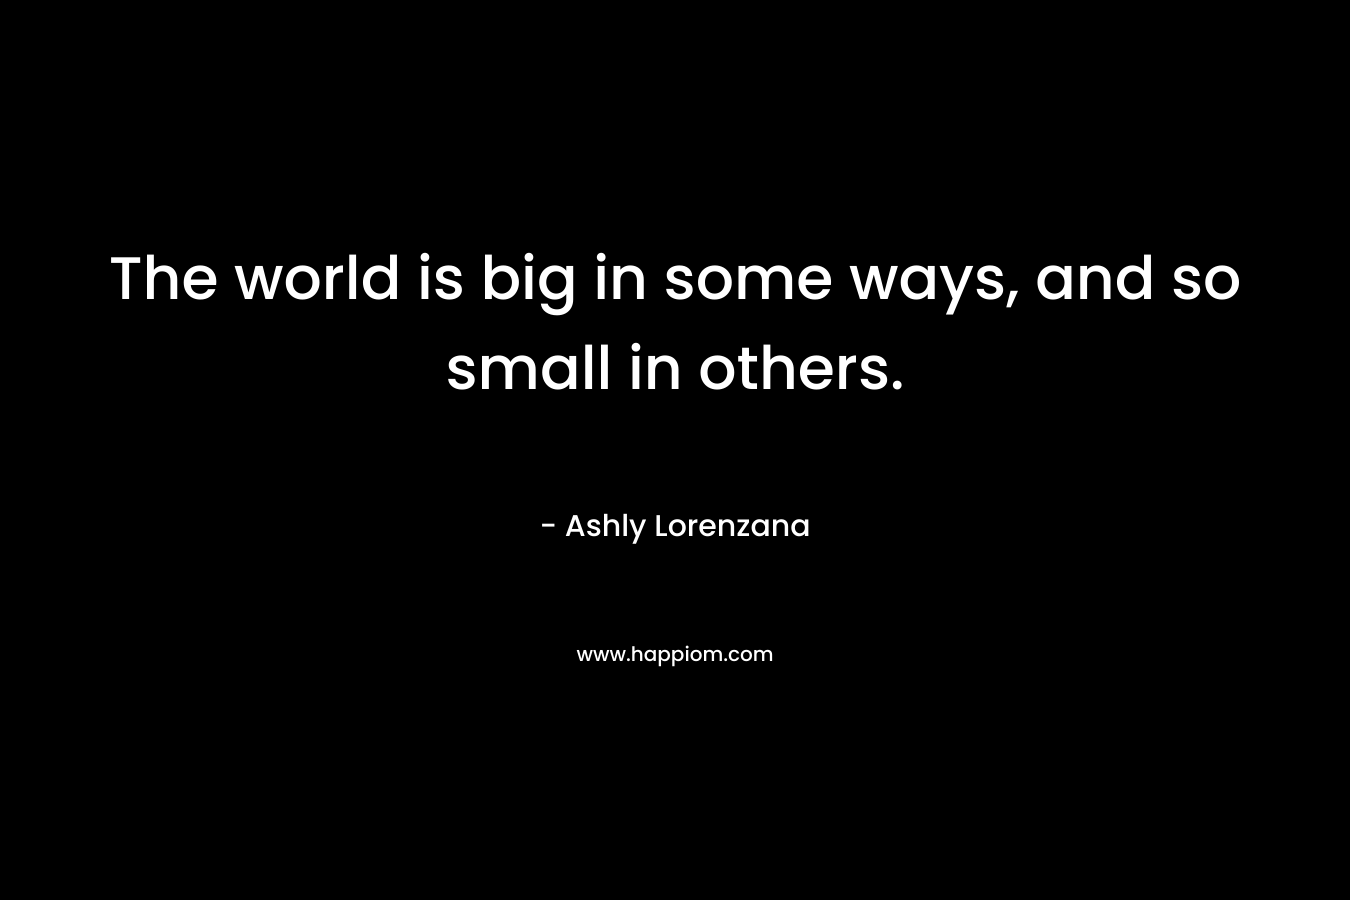 The world is big in some ways, and so small in others. – Ashly Lorenzana